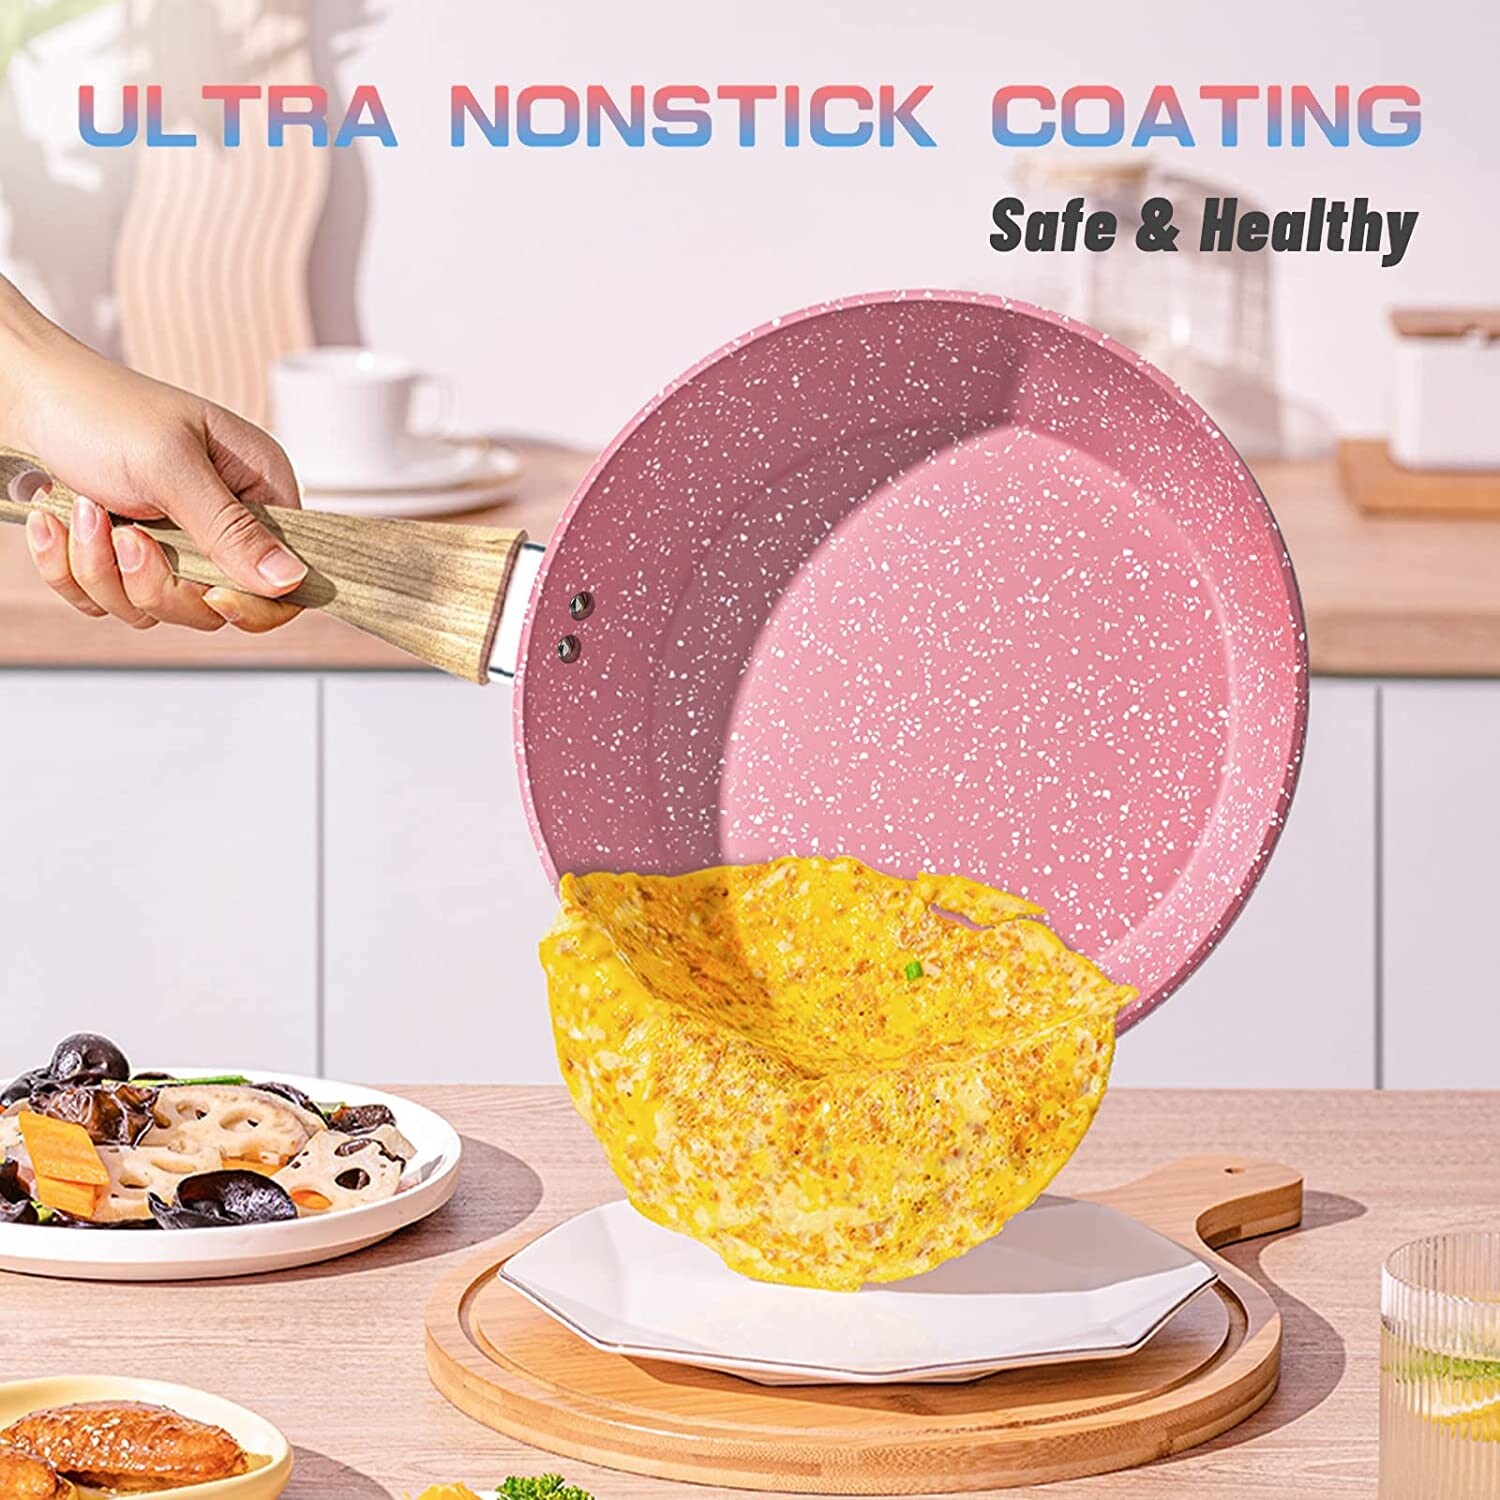 Nonstick Cookware Sets, 8 Piece Pots and Pans Set, Granite Stone Non Stick  Frying Pan Set with Stay Cool Handles, Pink kitchen Sets 100% PFOA-Free